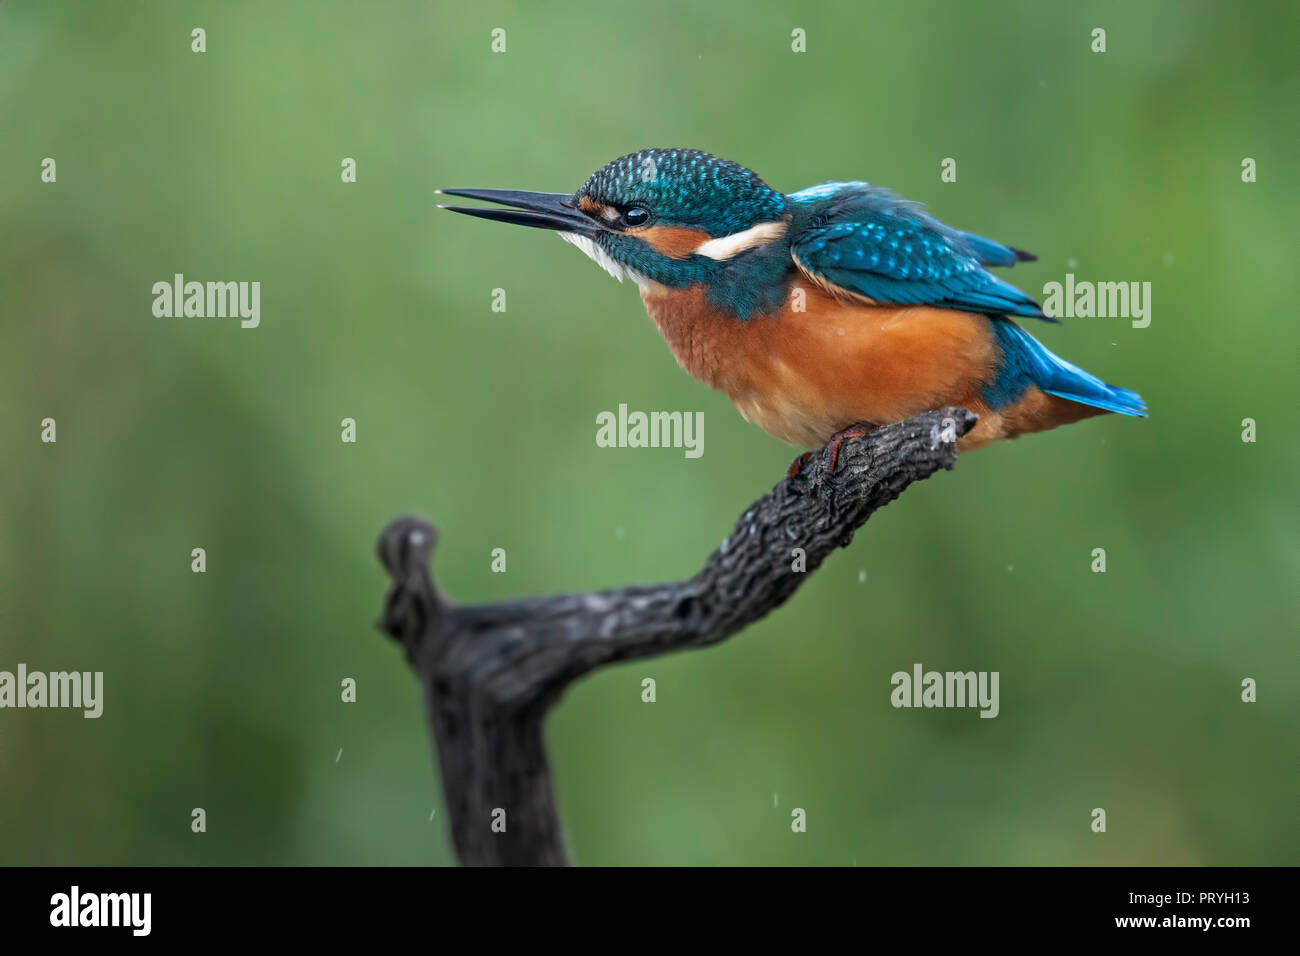 Common kingfisher (Alcedo atthis), young male sitting on wood, Middle Elbe Biosphere Reserve, Saxony-Anhalt, Germany Stock Photo